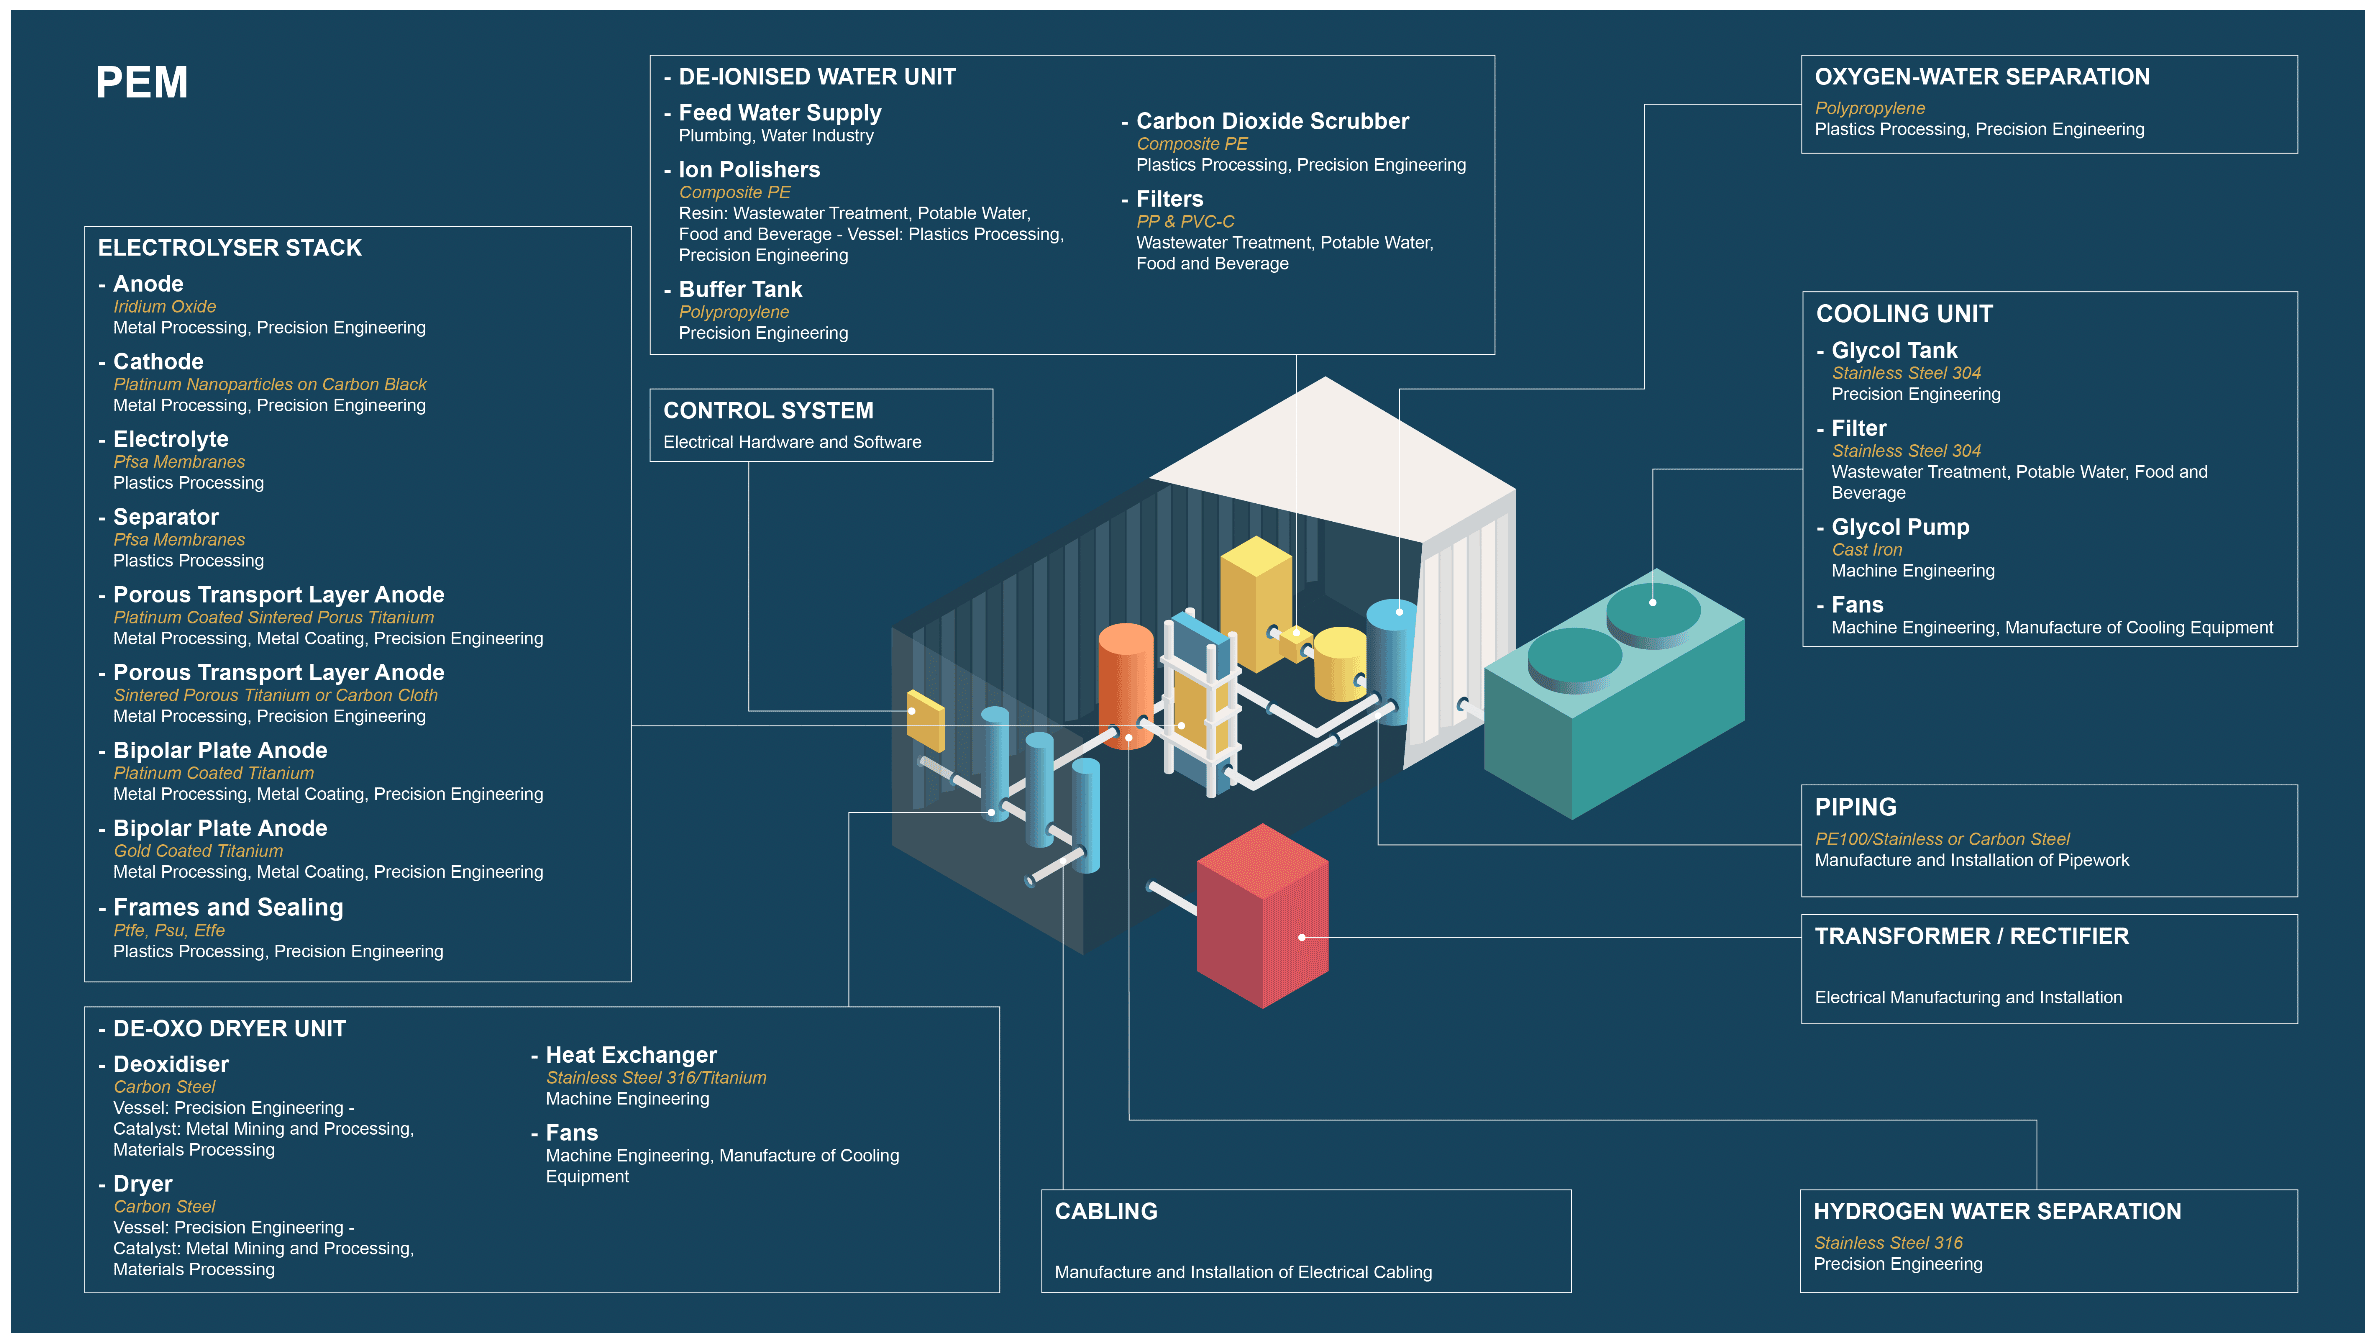 A diagram of a PEM supply chain. Shows an expanded diagram of what a PEM electrolyser looks like inside the container. It includes key systems and their supply chain such as electrolyser stack, de-oxo dryer unit, de-ionised water unit, control system, oxygen-water separation, cooling unit, piping, transformer/rectifier, hydrogen water separation and cabling.